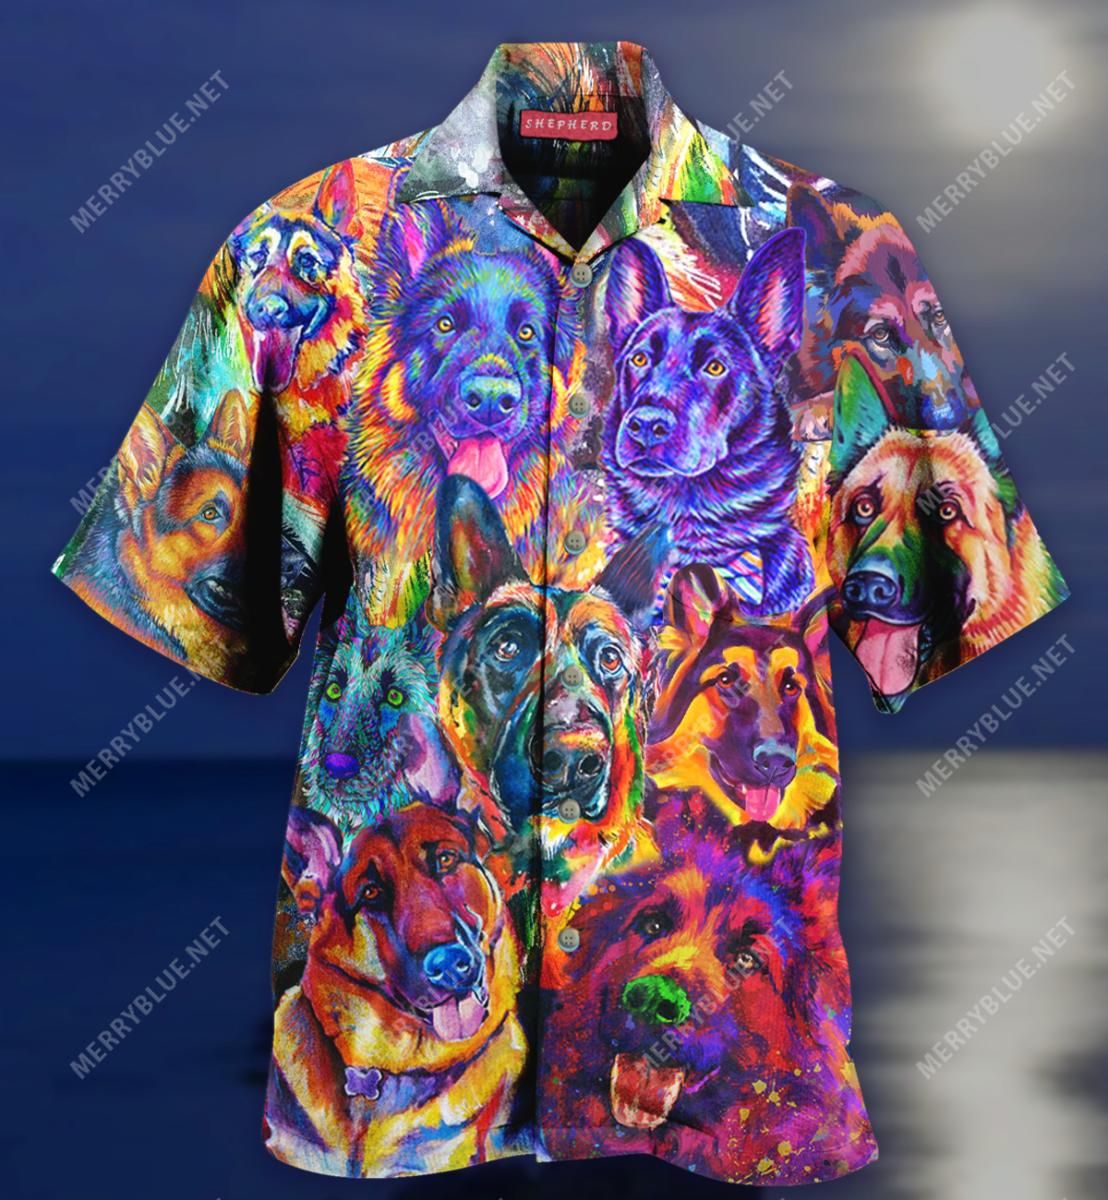 It’S Time To Enter Solar System Aloha Hawaiian Shirt Colorful Short Sleeve Summer Beach Casual Shirt For Men And Women